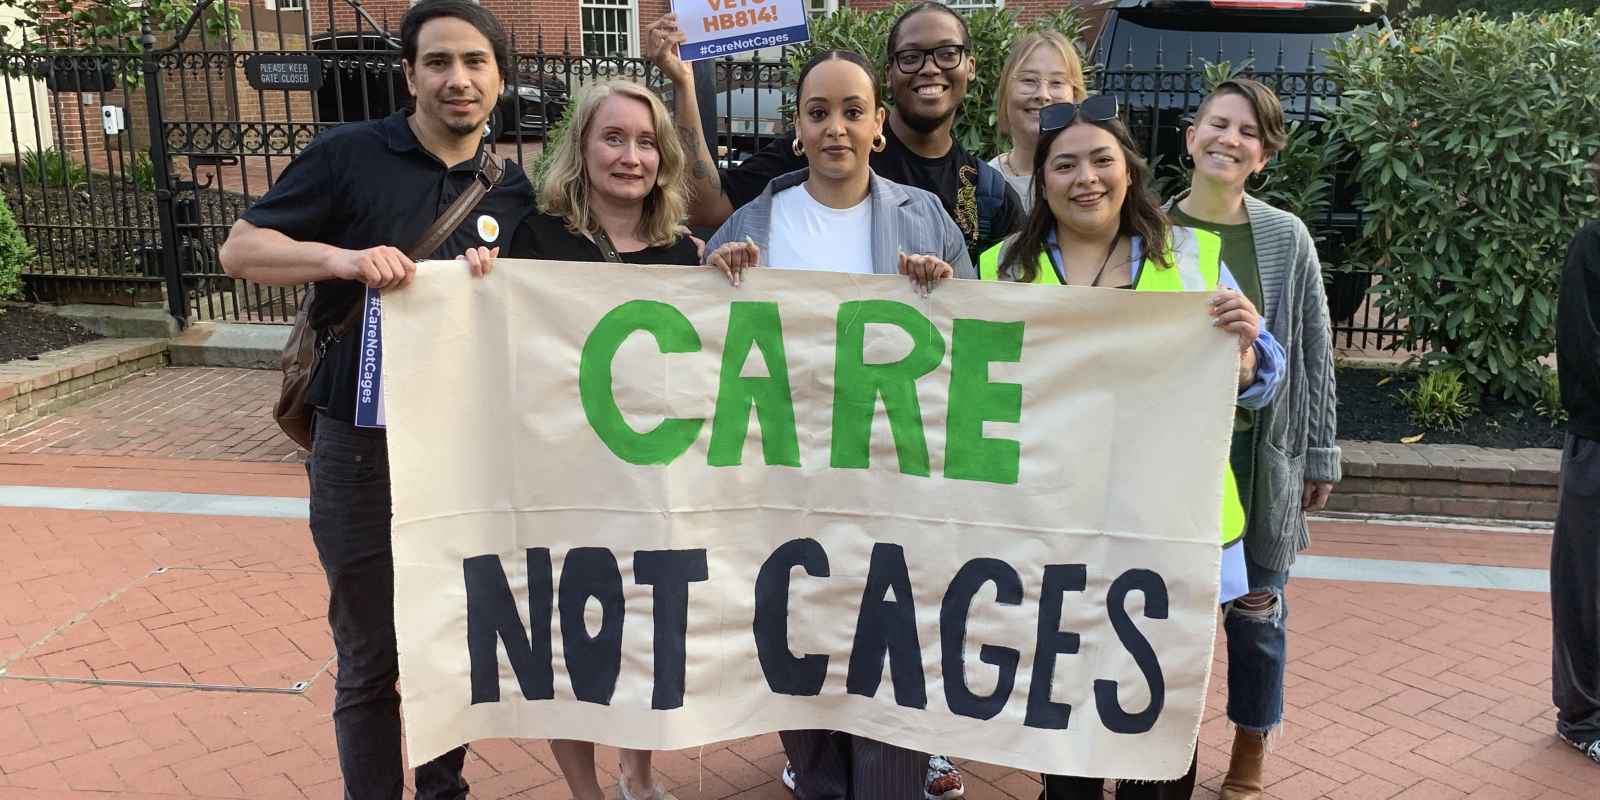 ACLU of Maryland staff members hold a banner that says, "Care Not Cages." They are outside in Lawyer's Mall for a rally asking Governor Moore to veto HB 814.